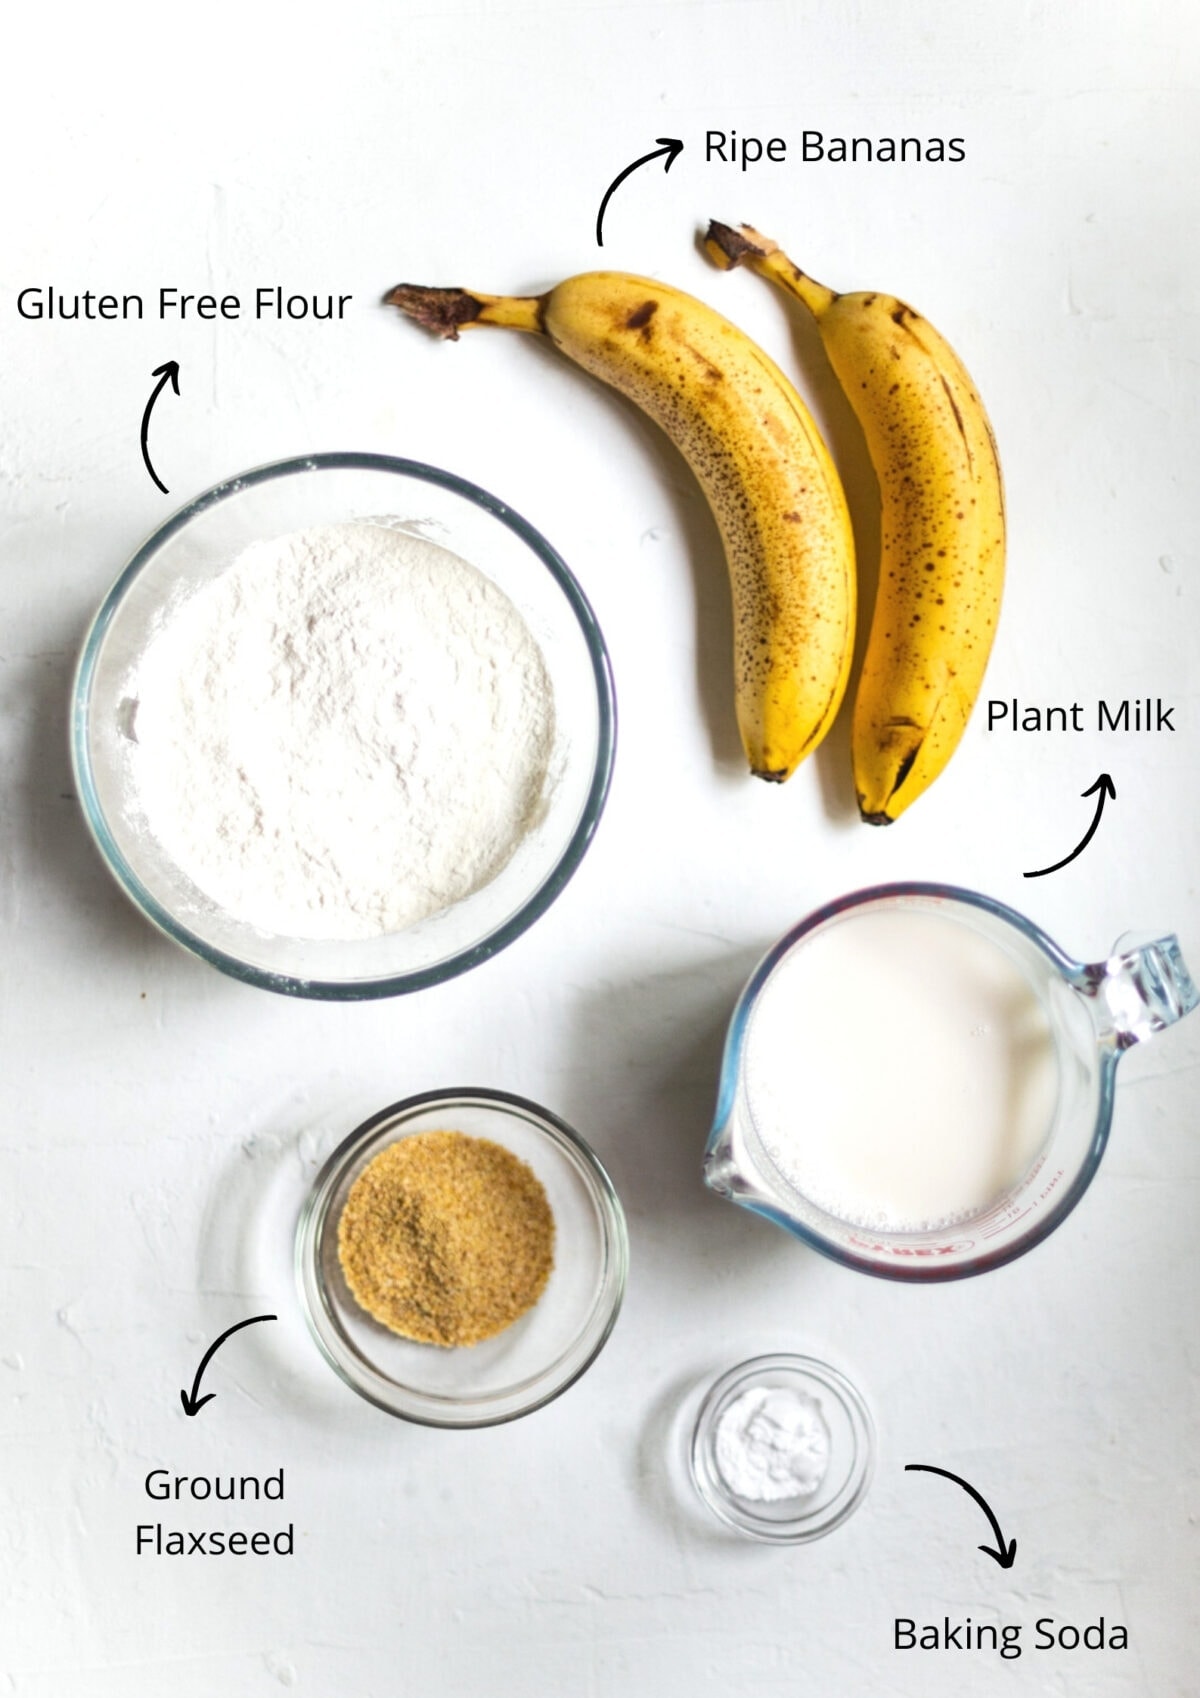 Overhead view of the sugar free pancake ingredients on a white background, and labelled.